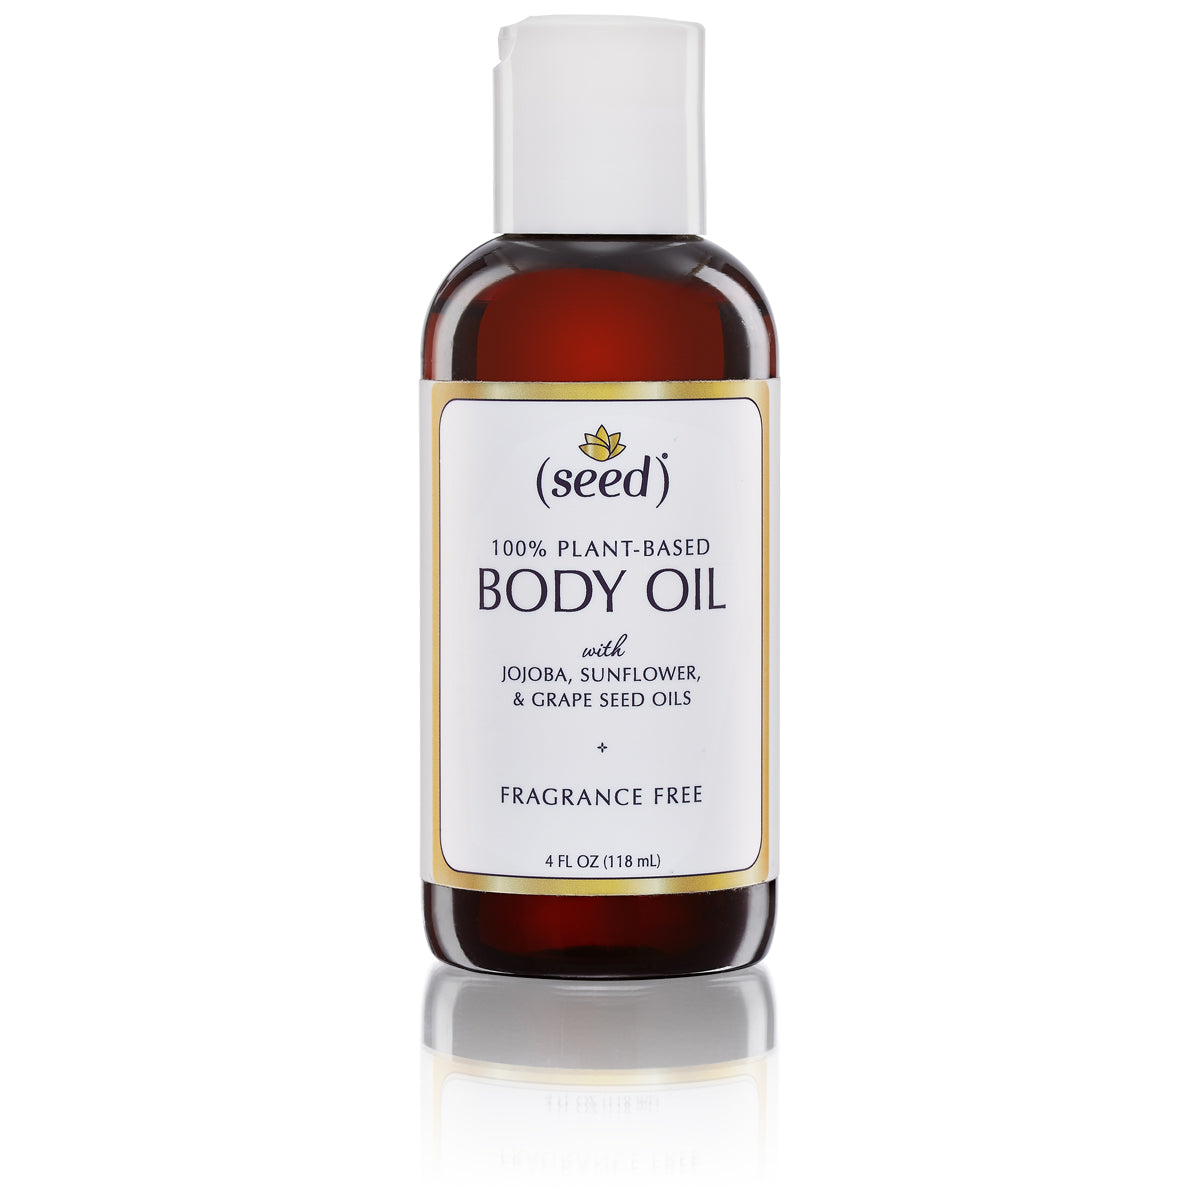 Seed Body Oil available in a dispensing disc cap or spray mist